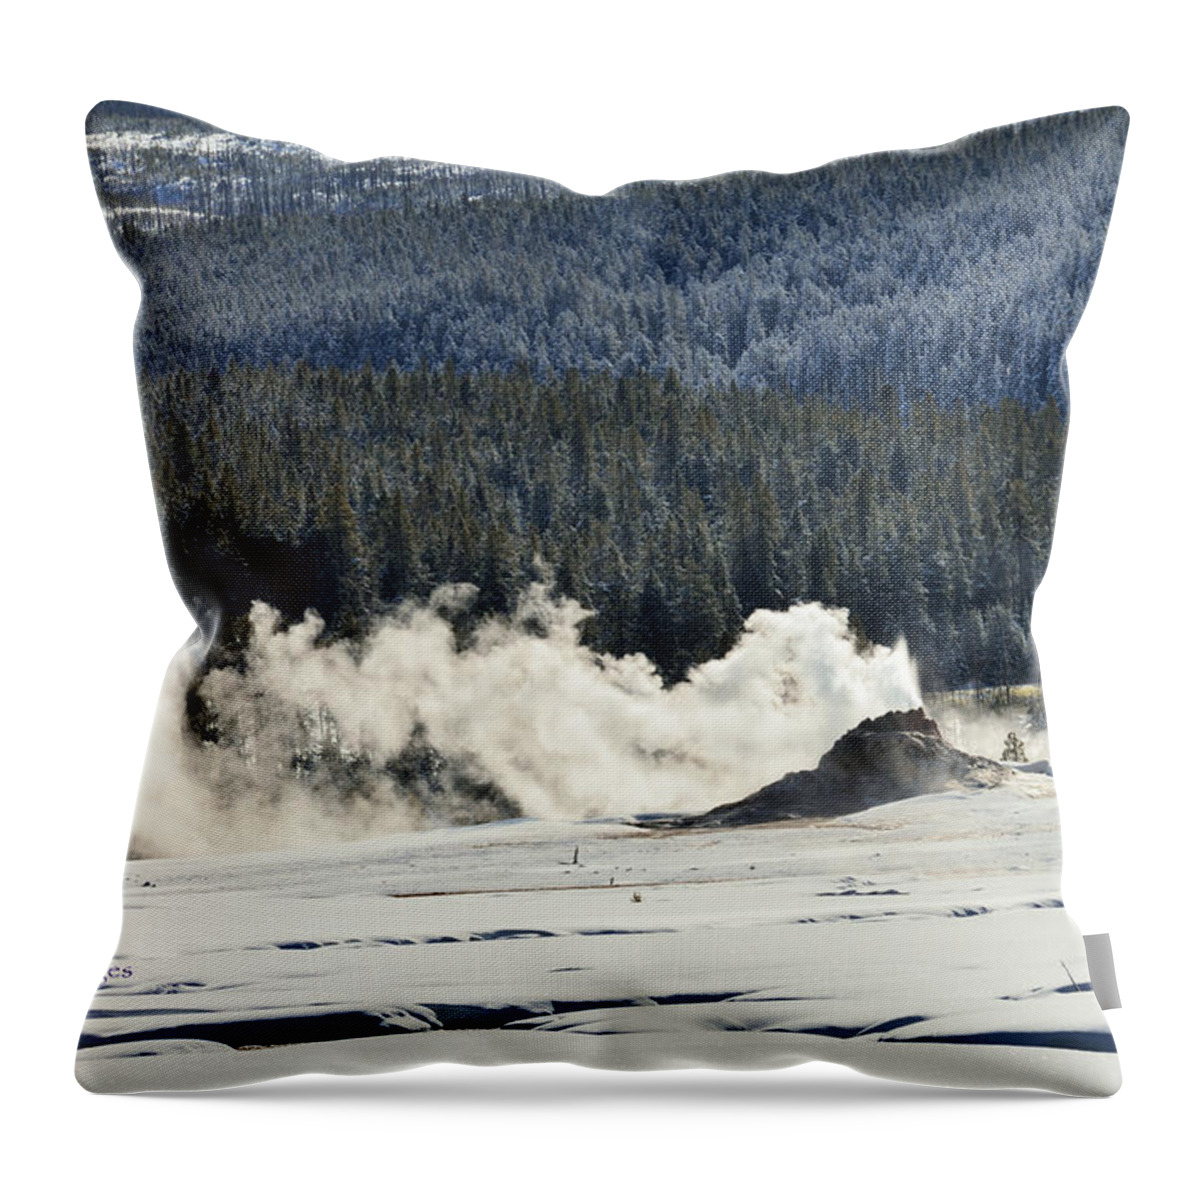 Geyser Throw Pillow featuring the photograph Geyser With Steam and Snow by Kae Cheatham